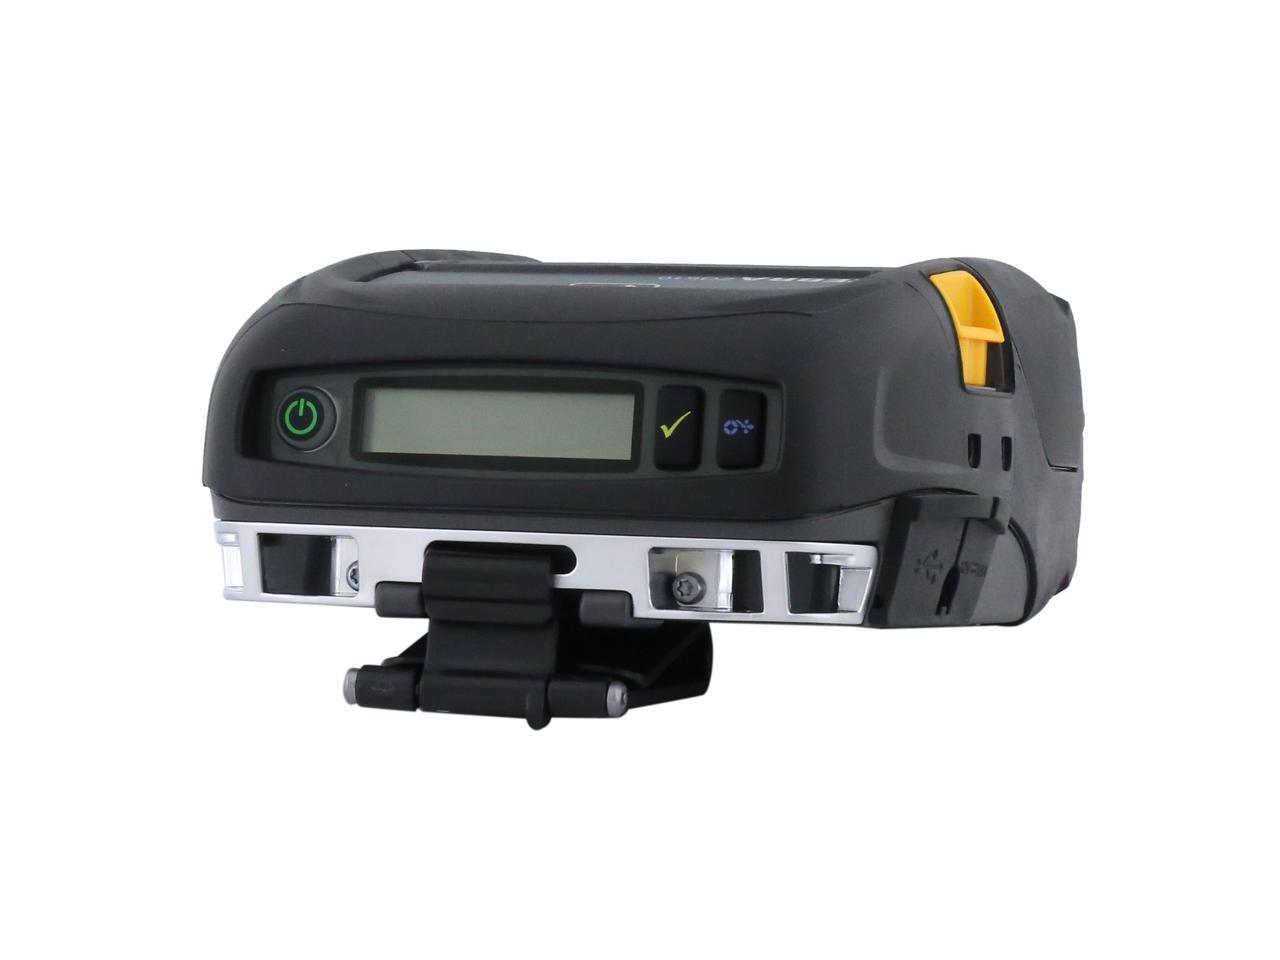 Zebra Zq510 3 Mobile Direct Thermal Receipt And Label Printer 203 Dpi Bluetooth 40 Linered 9881